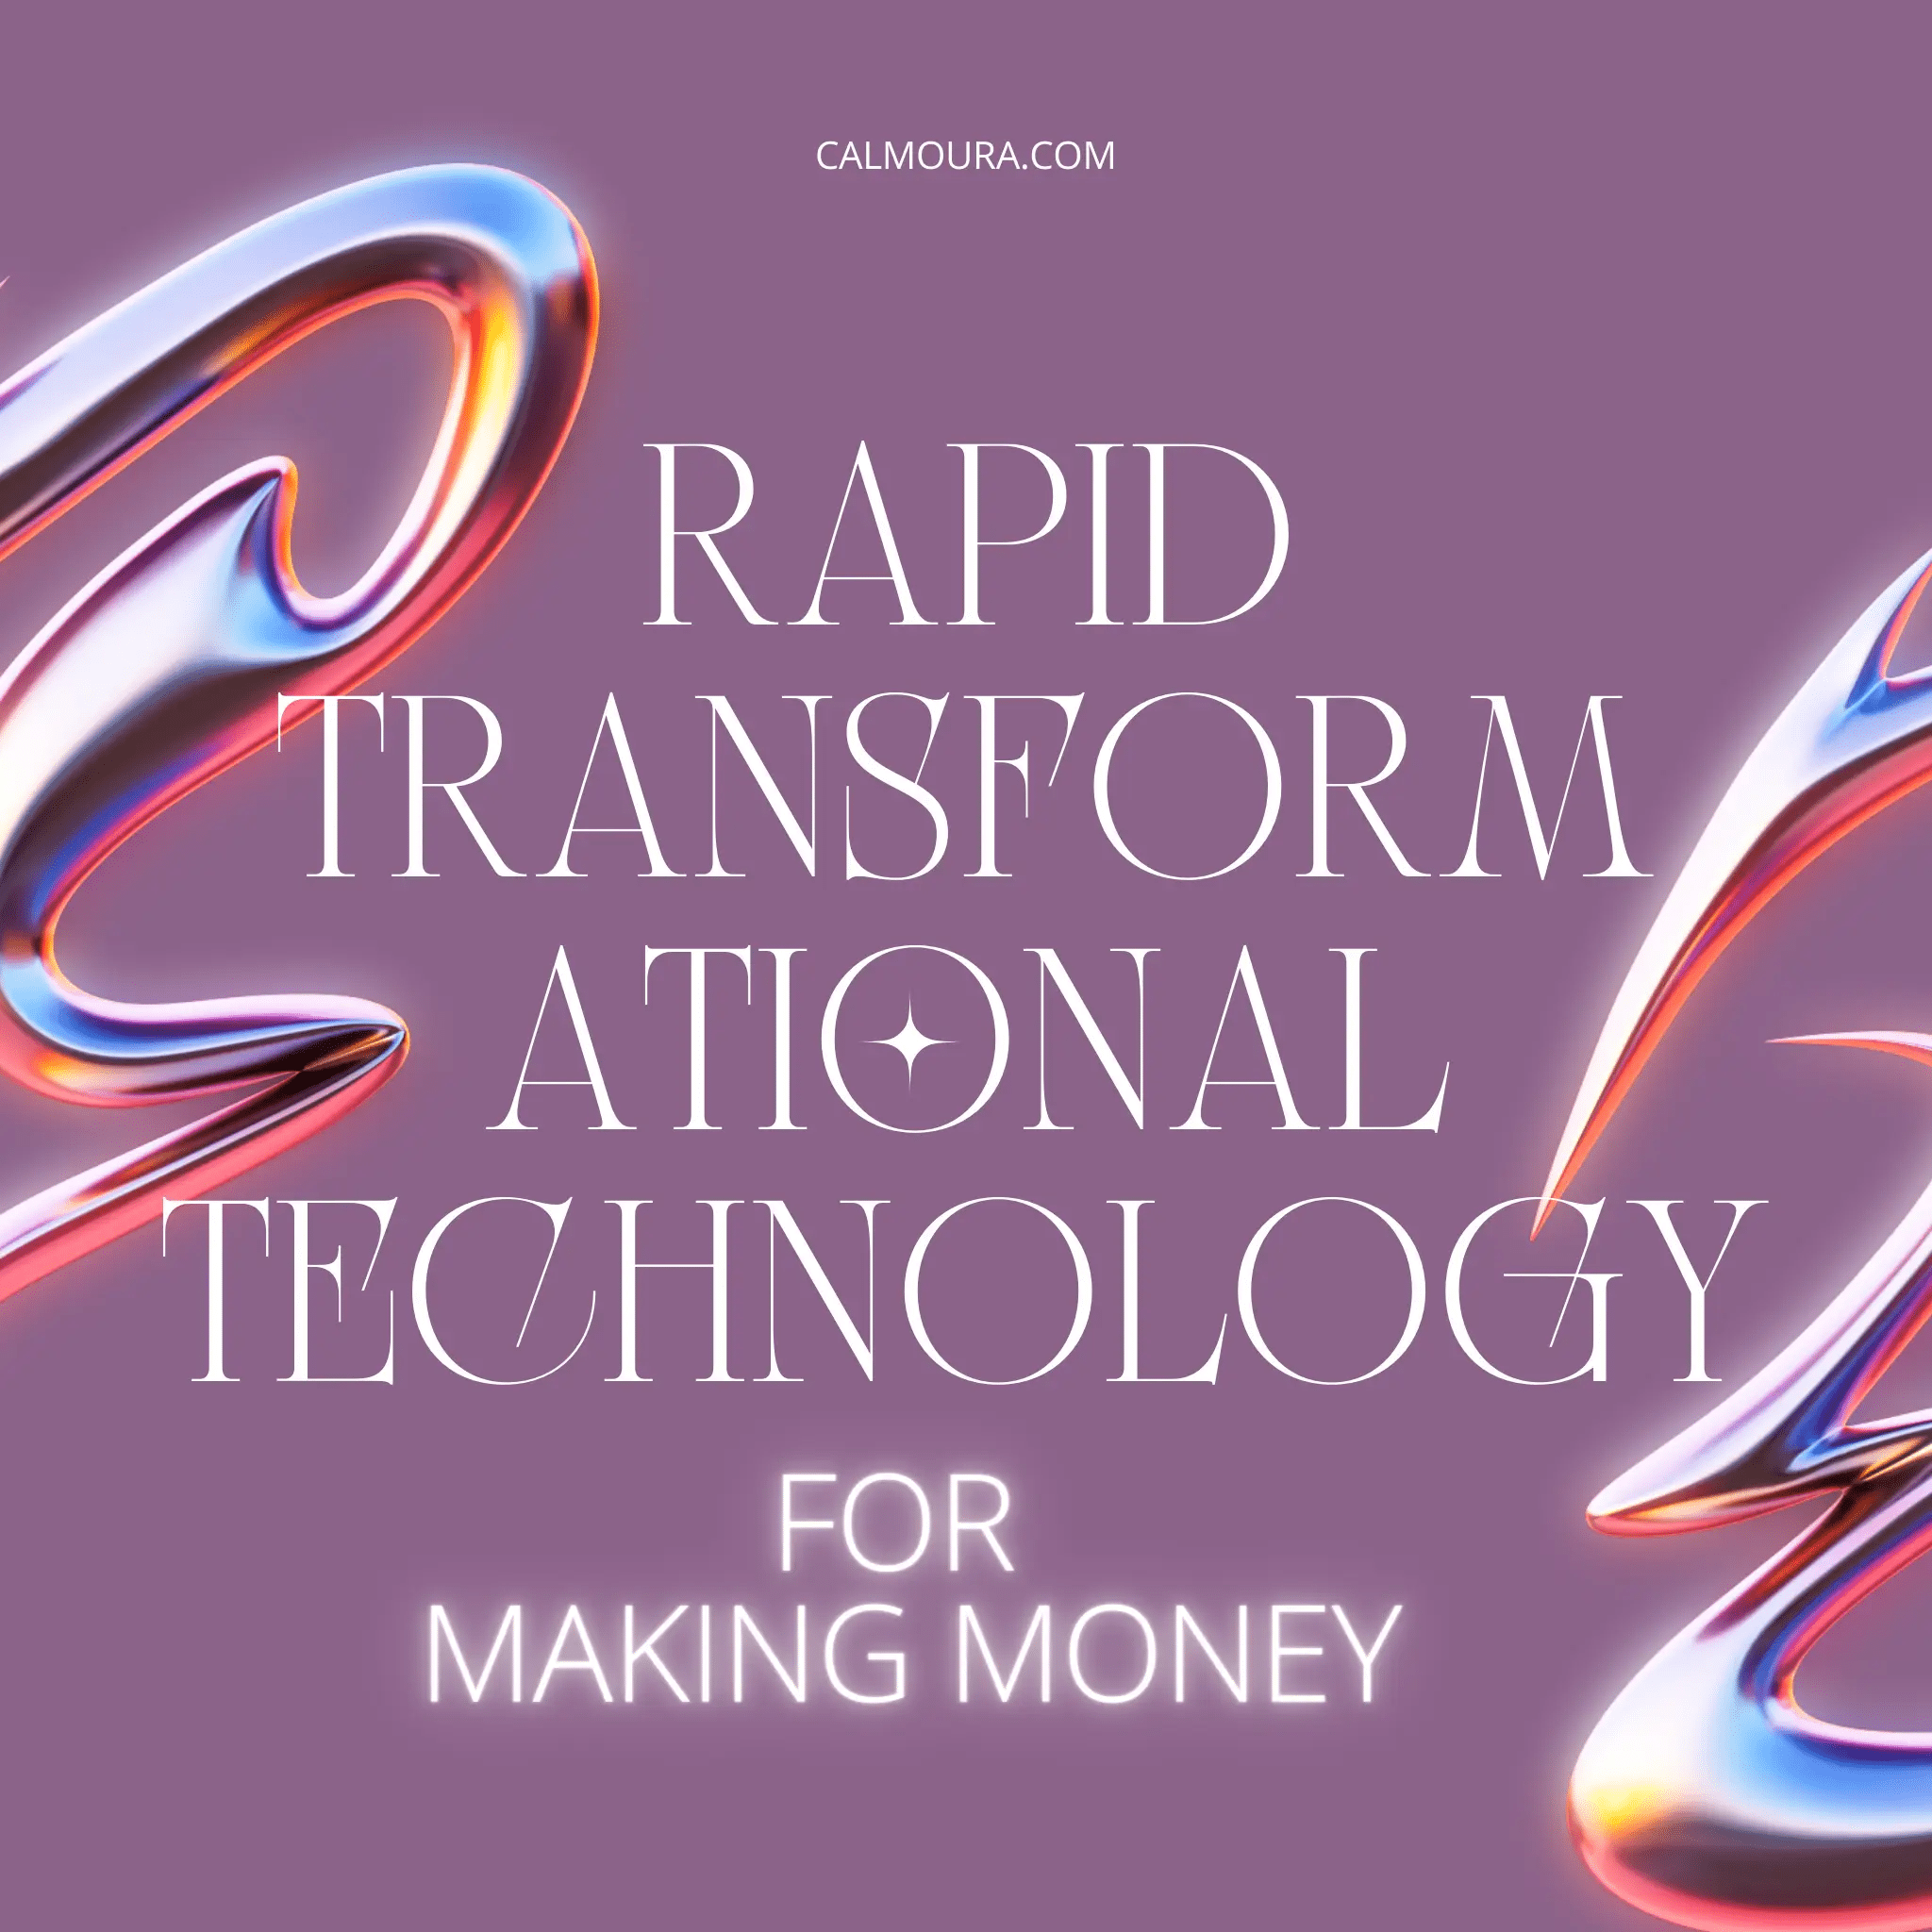 Calmoura Digital Rapid Transformational Technology for Making Money